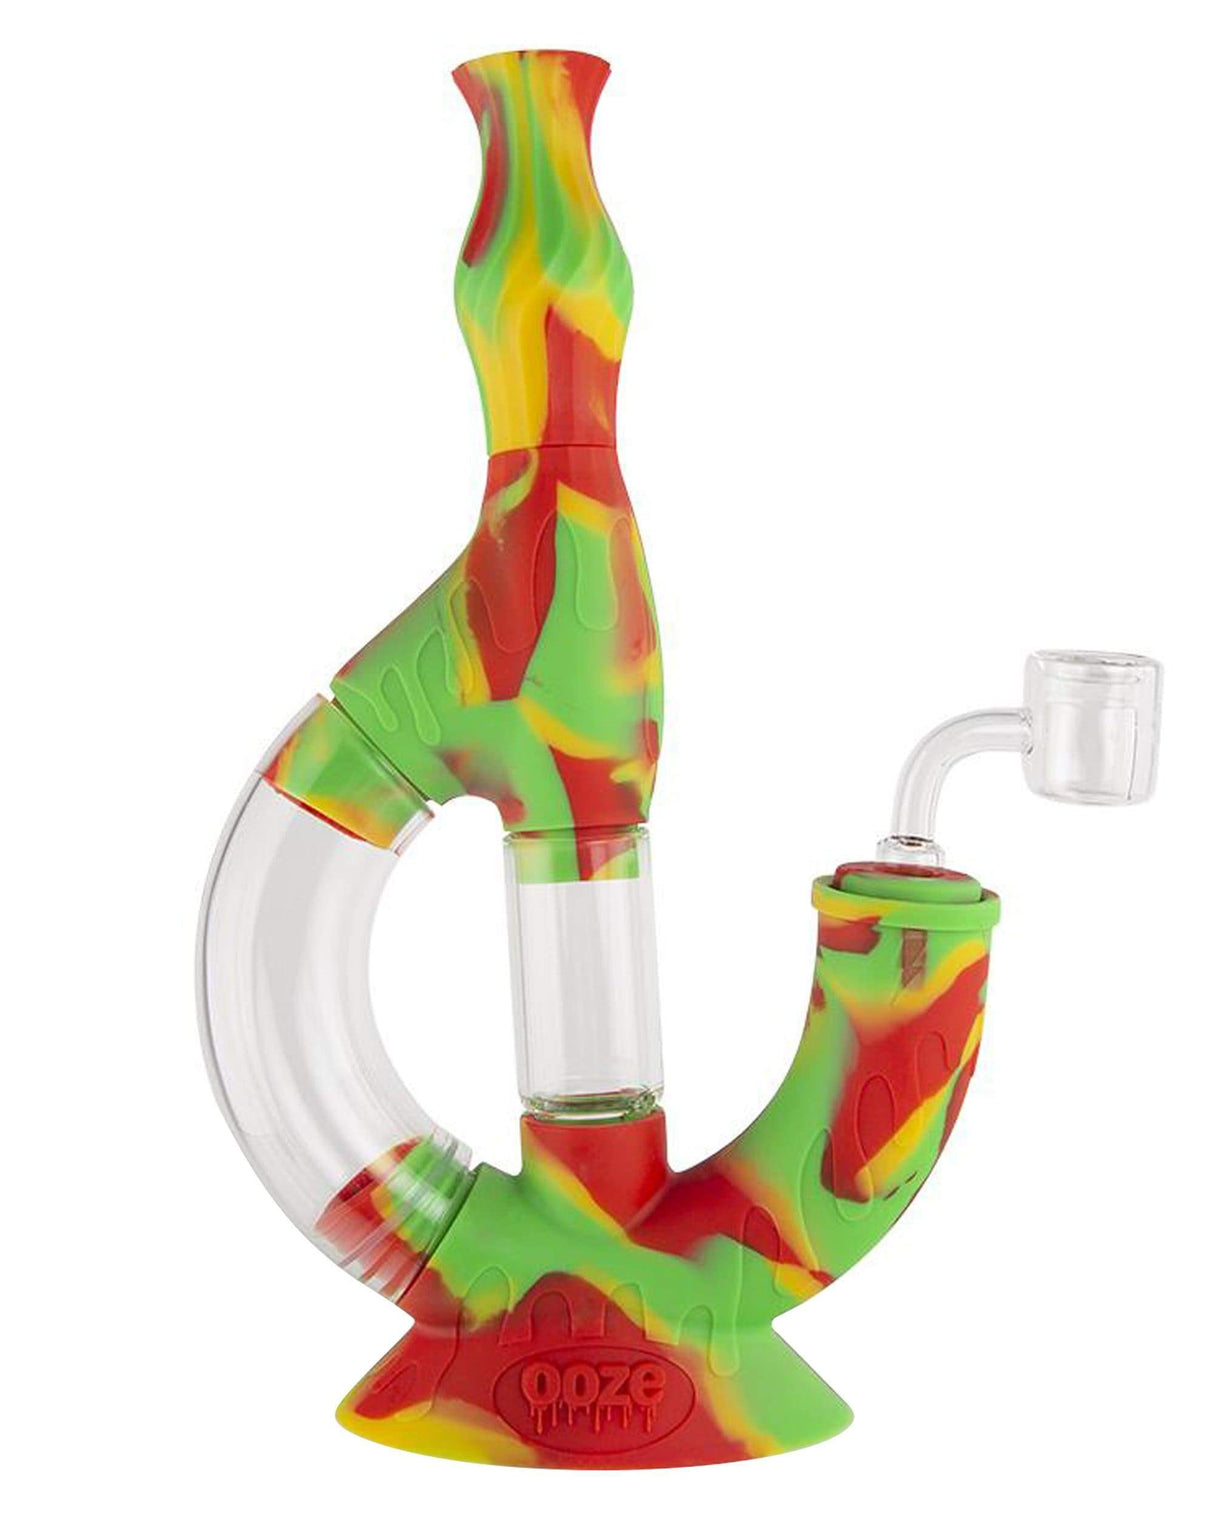 Ooze Echo 4-in-1 Silicone Bong in vibrant red, green, and yellow, with clear borosilicate glass accents